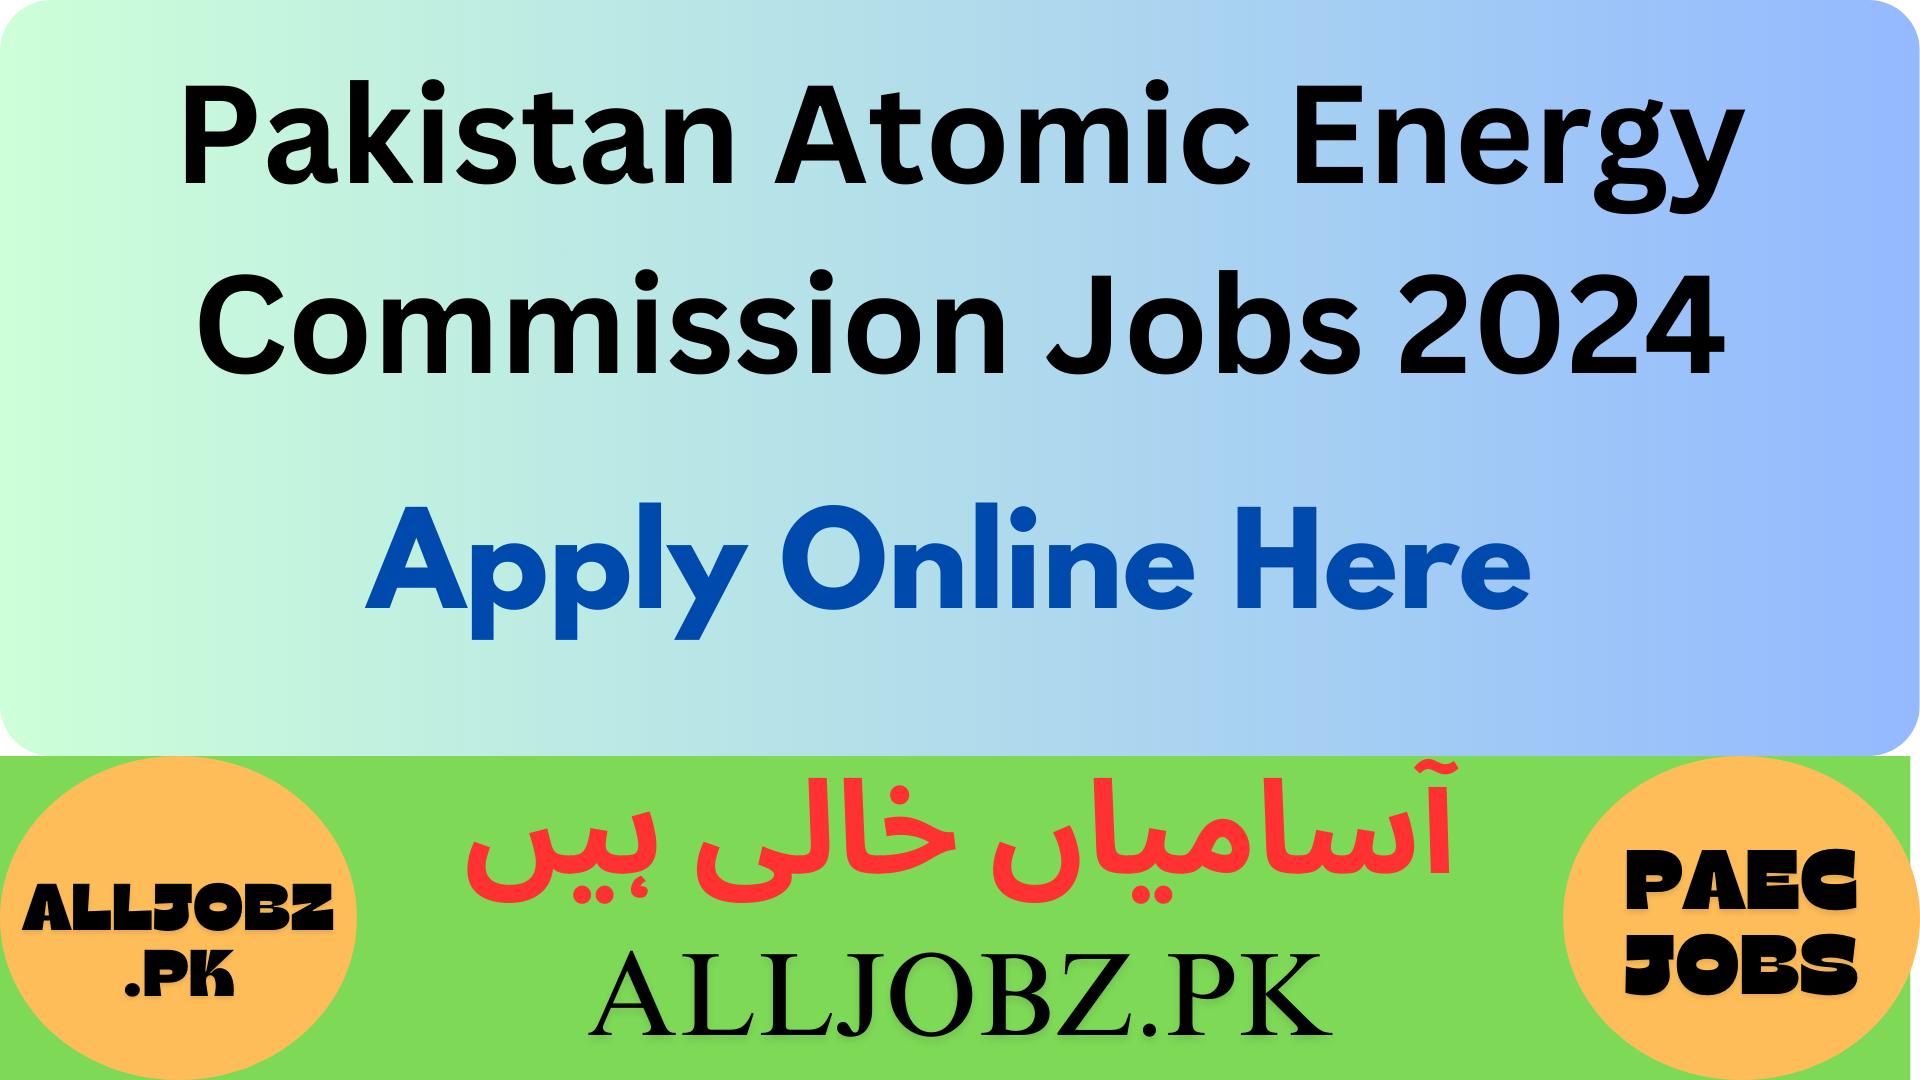 A Leading Pakistan Atomic Energy Commission Jobs Online Apply Invites Applications From Highly Qualified And Experienced Individuals For The Following Positions, Public Sector Jobs, It Jobs, Computer Science Jobs, Engineering Jobs, Cybersecurity Jobs, Data Science Jobs, Software Engineering Jobs, Network Services Jobs, Computer Hardware Jobs, Driving Jobs, Assistant Manager Jobs, Tech Jobs, Computer Operator Jobs, Driver Jobs, Artificial Intelligence Jobs, Machine Learning Jobs, Cloud Computing Jobs, Operating System Jobs, Configuration Jobs, Troubleshooting Jobs, Electronic Equipment Jobs, Key Depression Per Hour Jobs, Secretarial Jobs, Software Installation Jobs, Job Qualifications, Job Experience, Job Requirements, Attractive Pay Scales, Fringe Benefits, Hec Certified Degrees, Pec Certified Degrees, Government Recognized Institutes, Equivalence Certificates, Age Limit Jobs, Specialized Experience Jobs, Test Interview Jobs, Career Development.